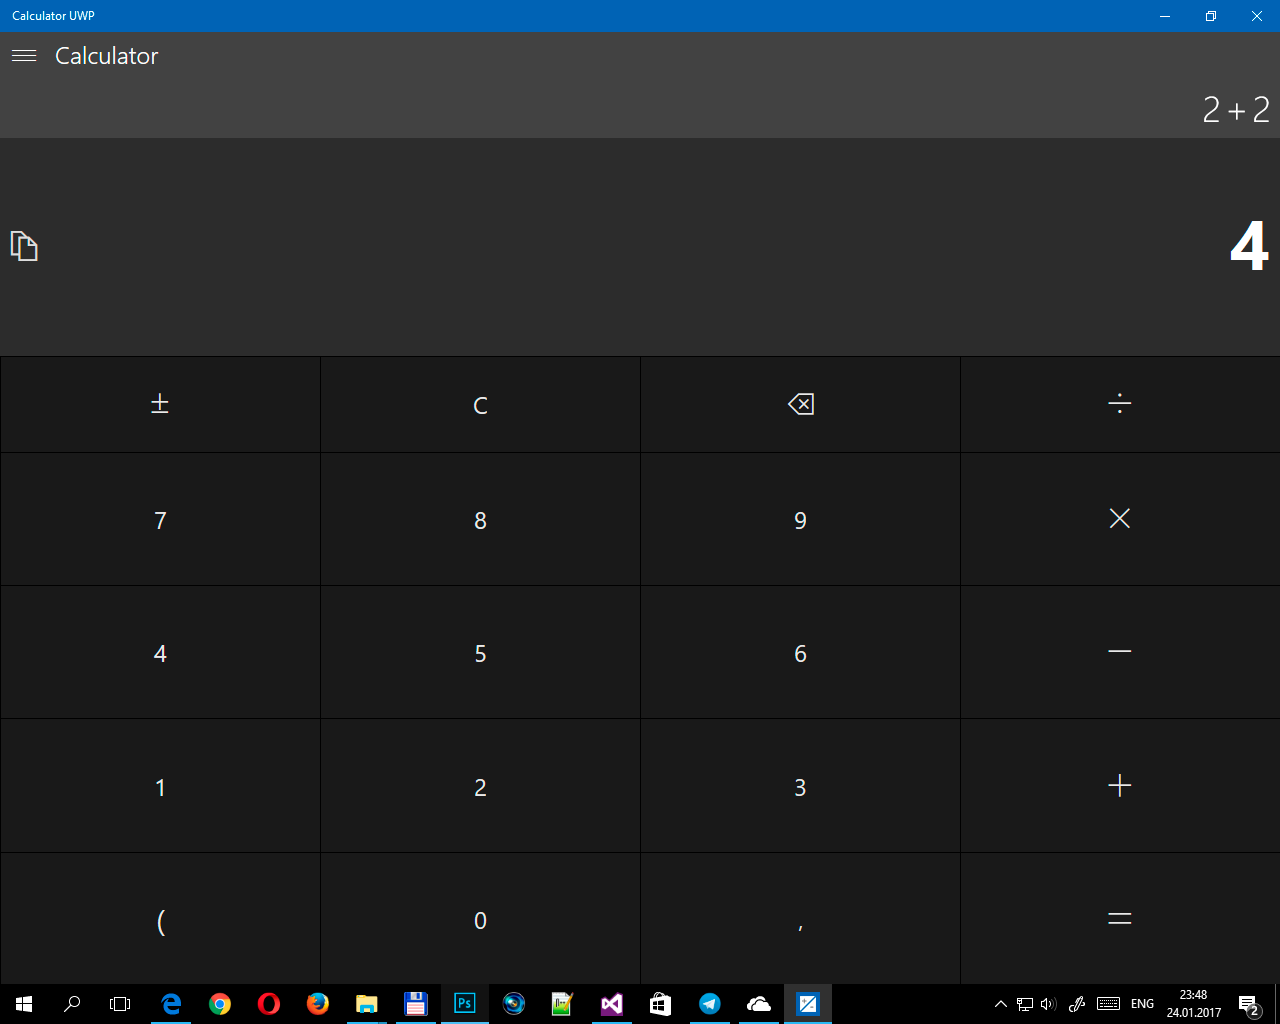 The main interface with the dark theme.